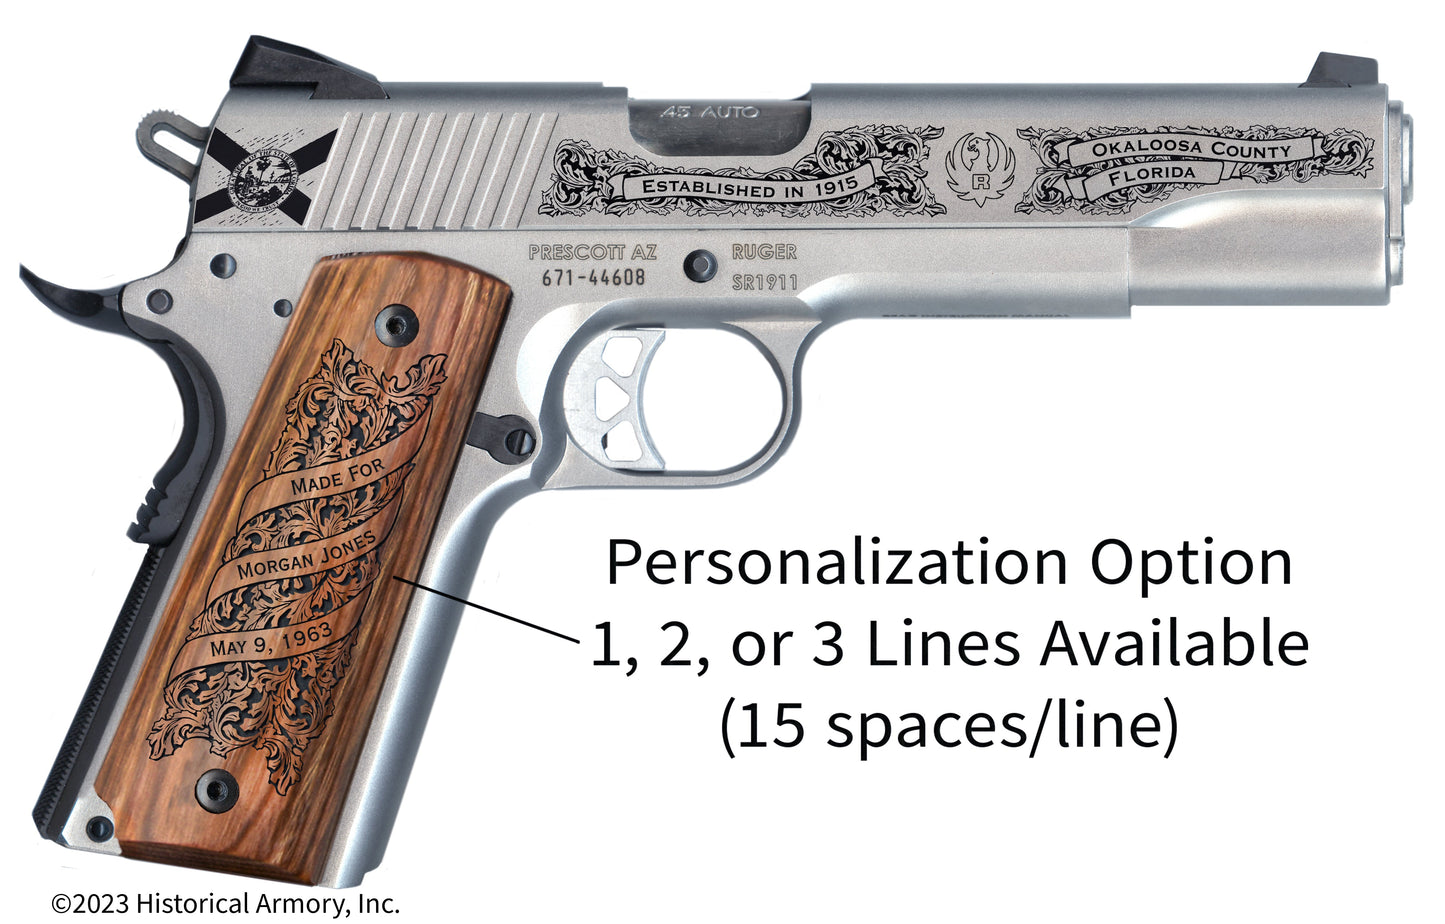 Okaloosa County Florida Personalized Engraved .45 Auto Ruger 1911